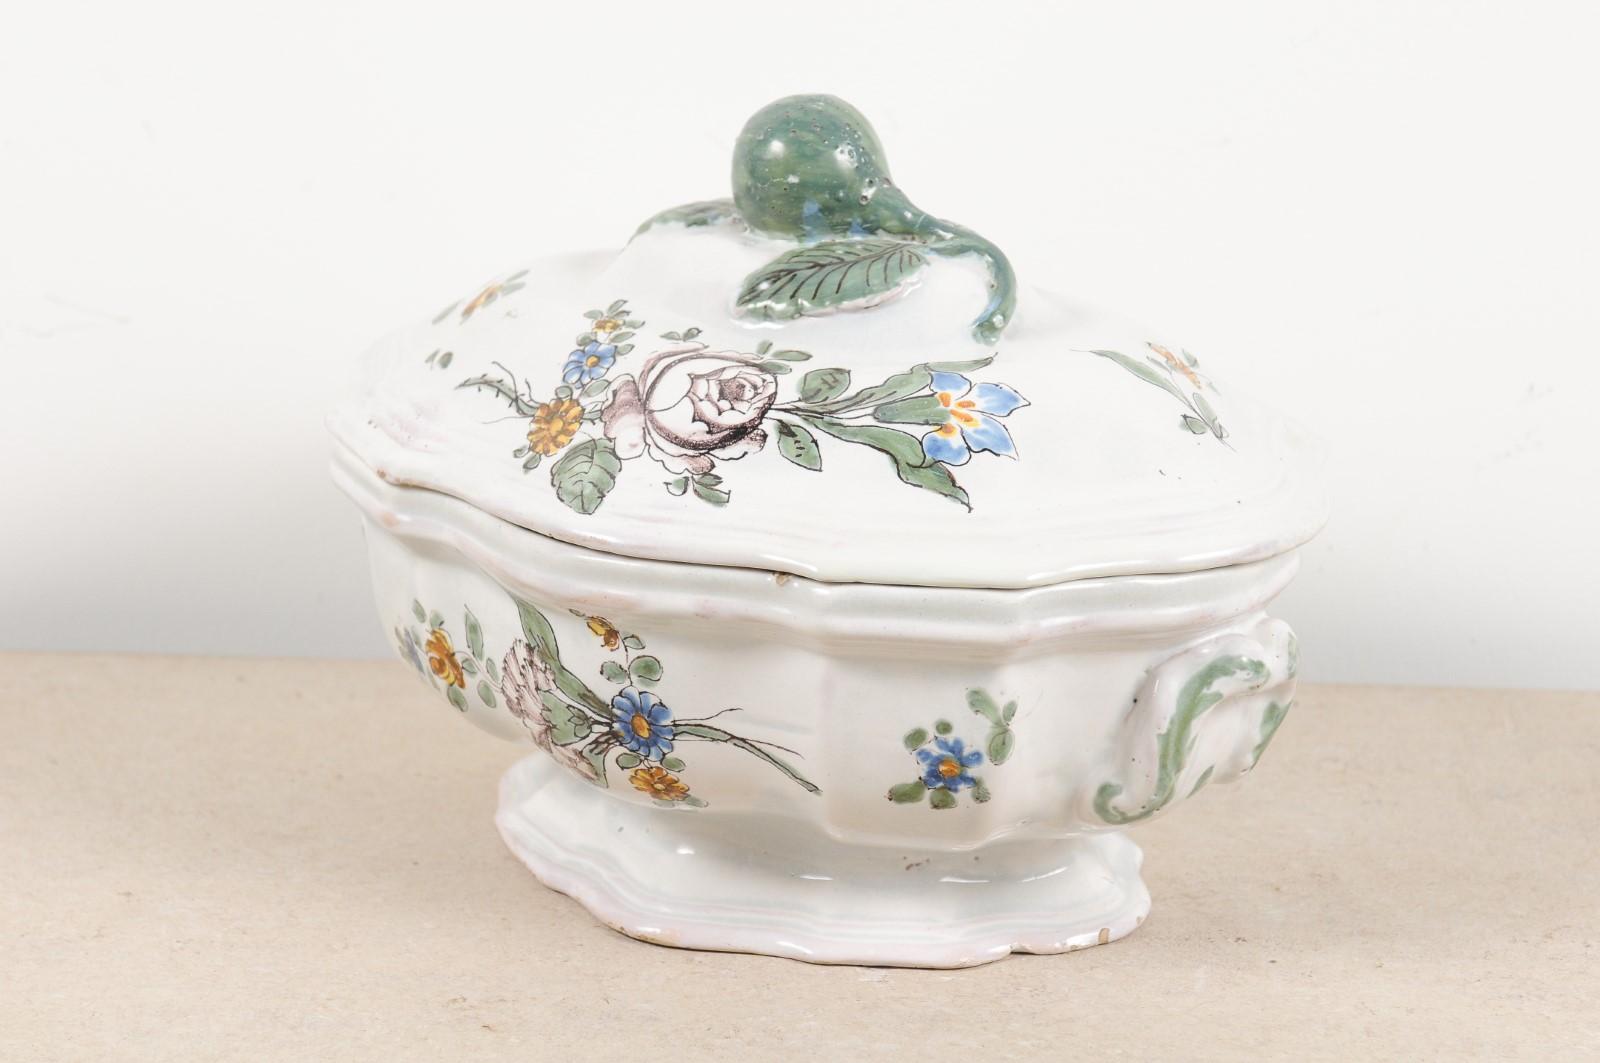 French 1750s Faience Oval Shaped Soup Tureen from Bordeaux with Floral Decor 4